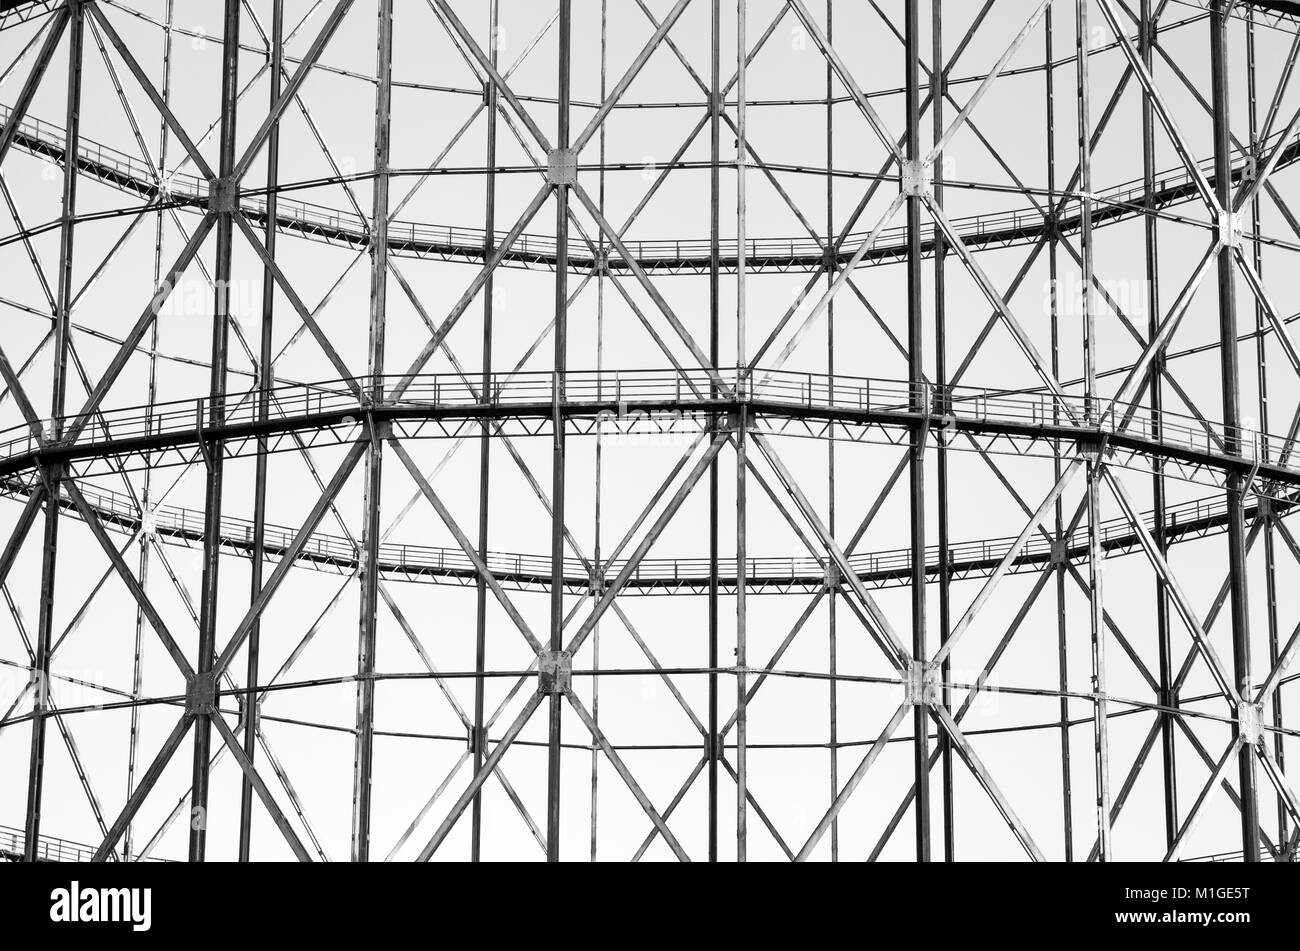 ARCHEOLOGY OF INDUSTRIAL ARCHITECTURE: OLD GASOMETER CLOSEUP/TEXTURE Stock Photo